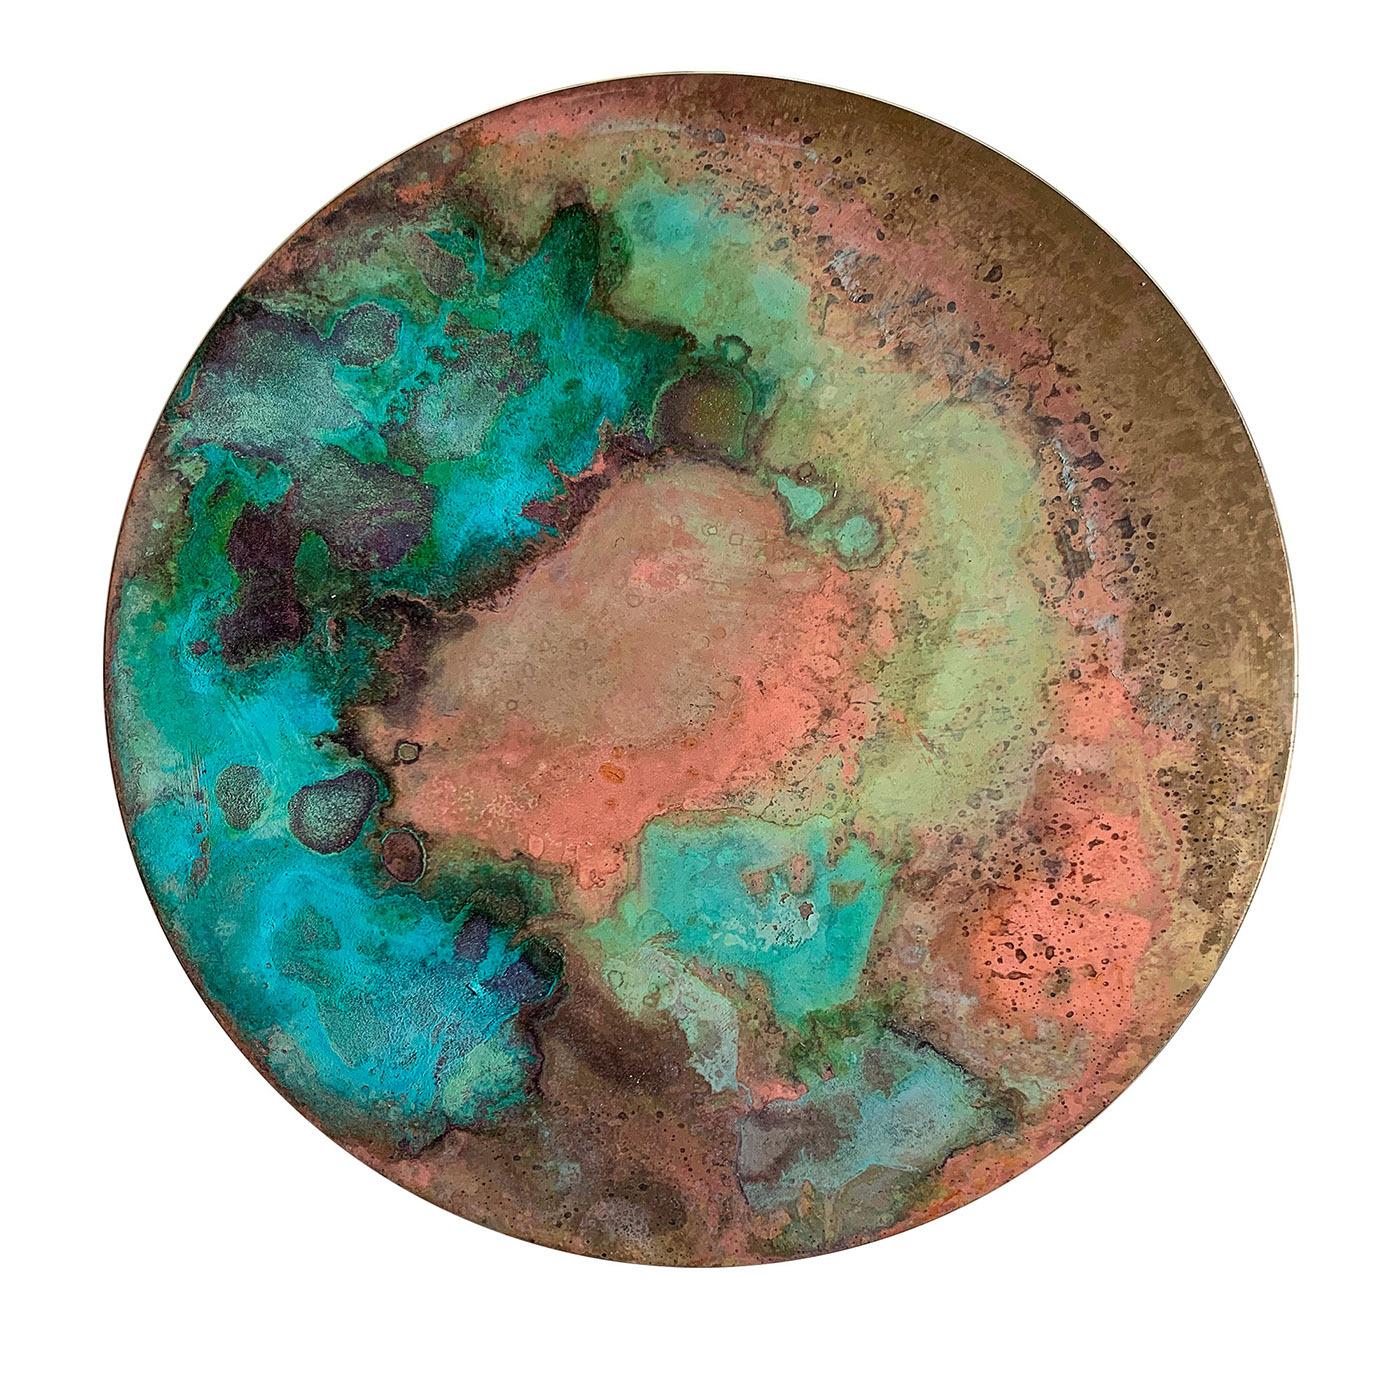 Part of the Aurora Collection of designs conceived with the romantic dawn hues in mind, this decorative disk owes its design to a masterful use of oxides and acids. Pink, turquoise, green, blue, and beige hues merge in a nebulous decoration